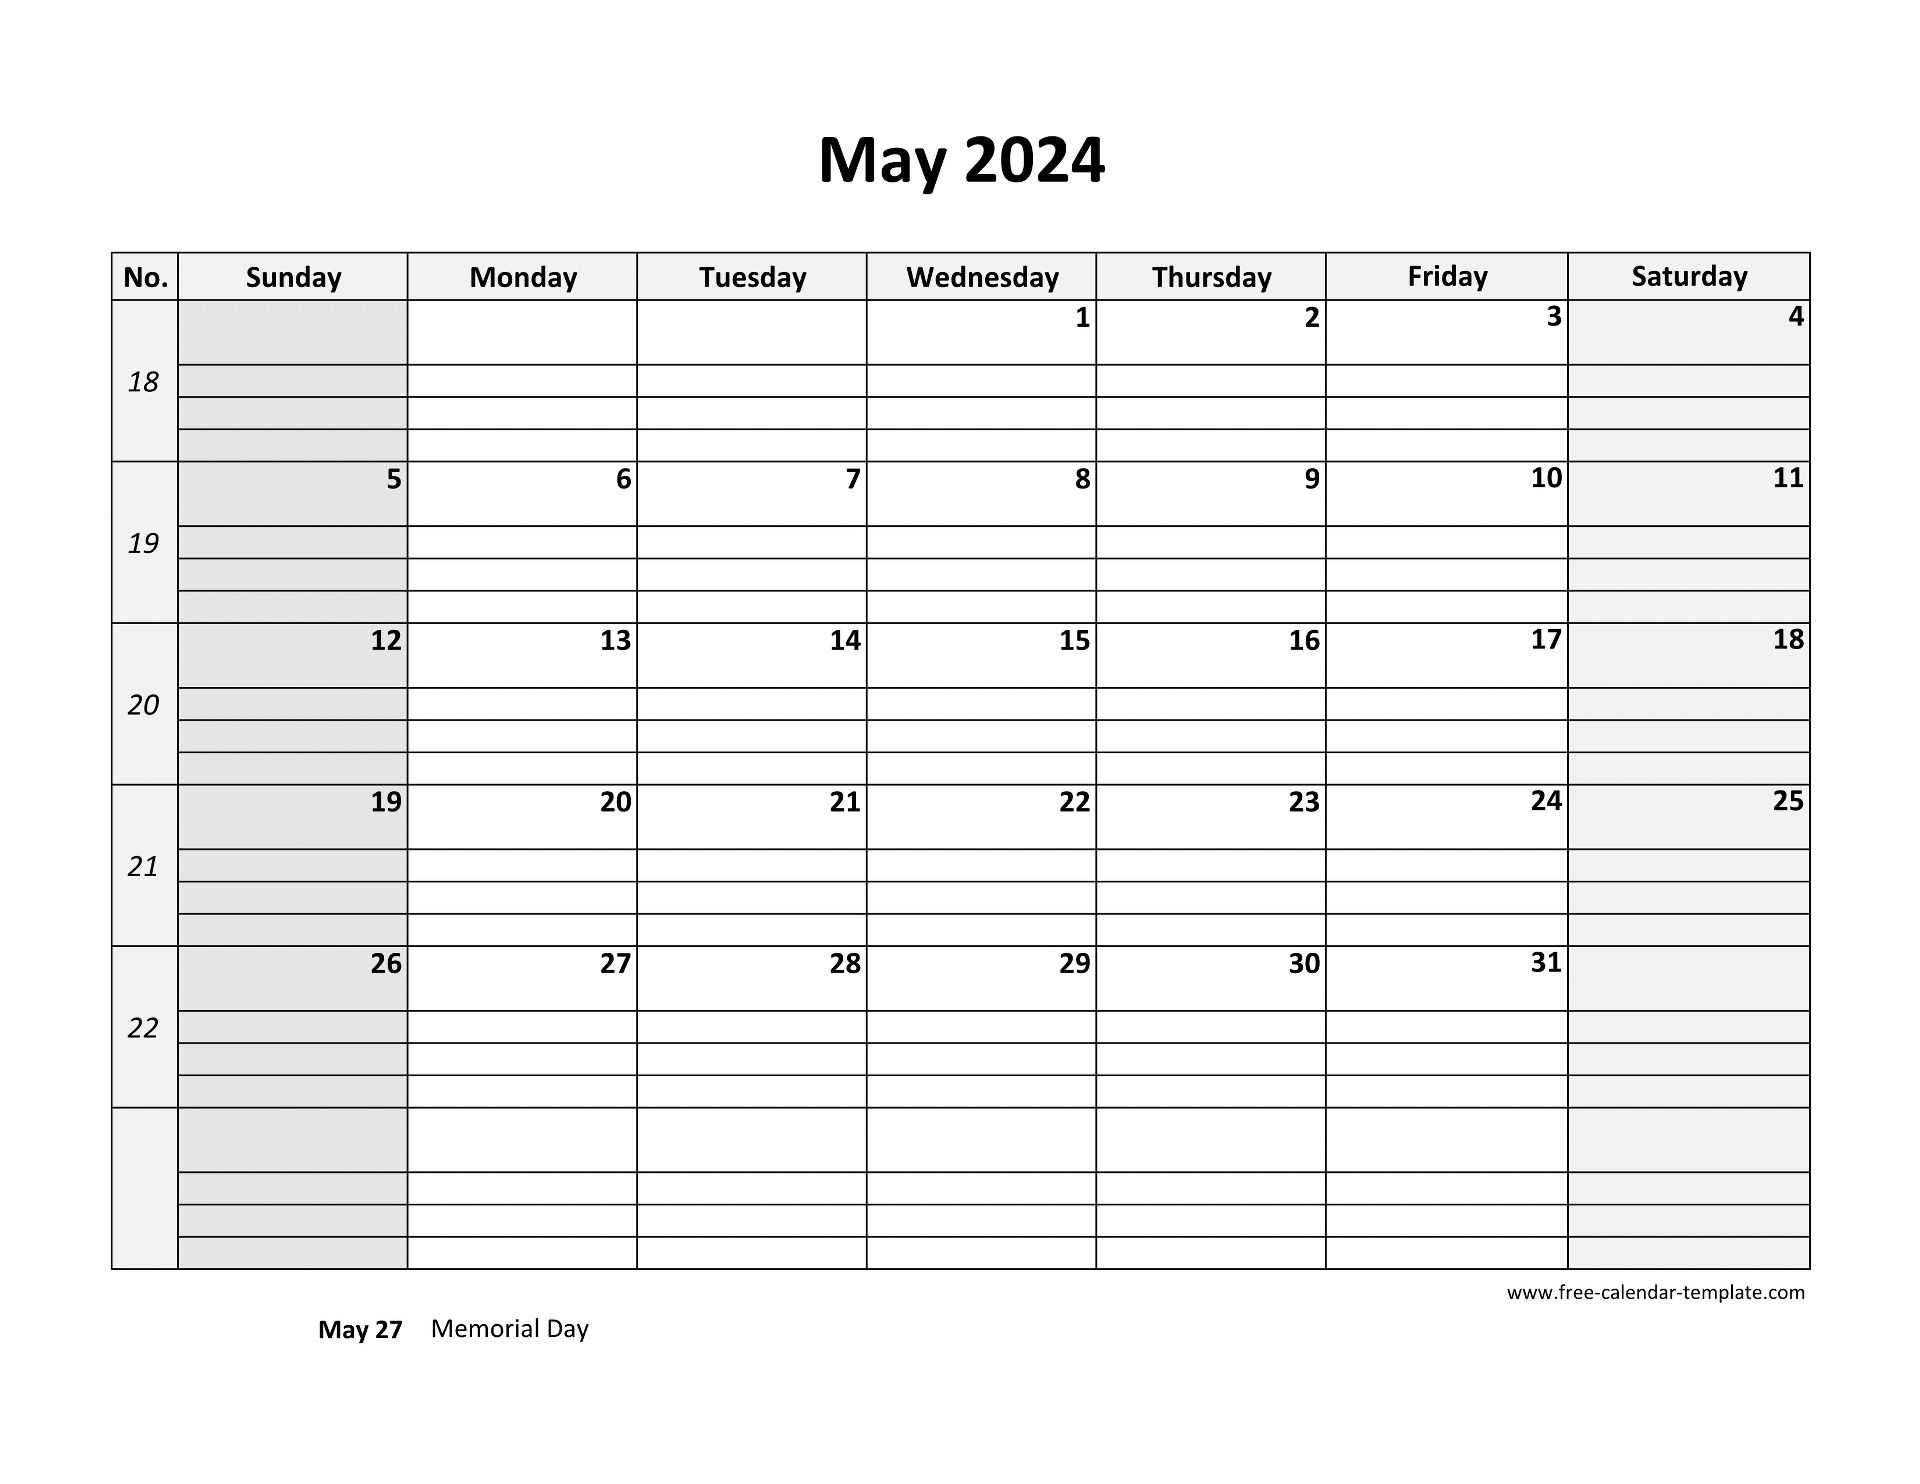 May 2024 Calendar Free Printable With Grid Lines Designed for Printable May 2024 Calendar With Lines